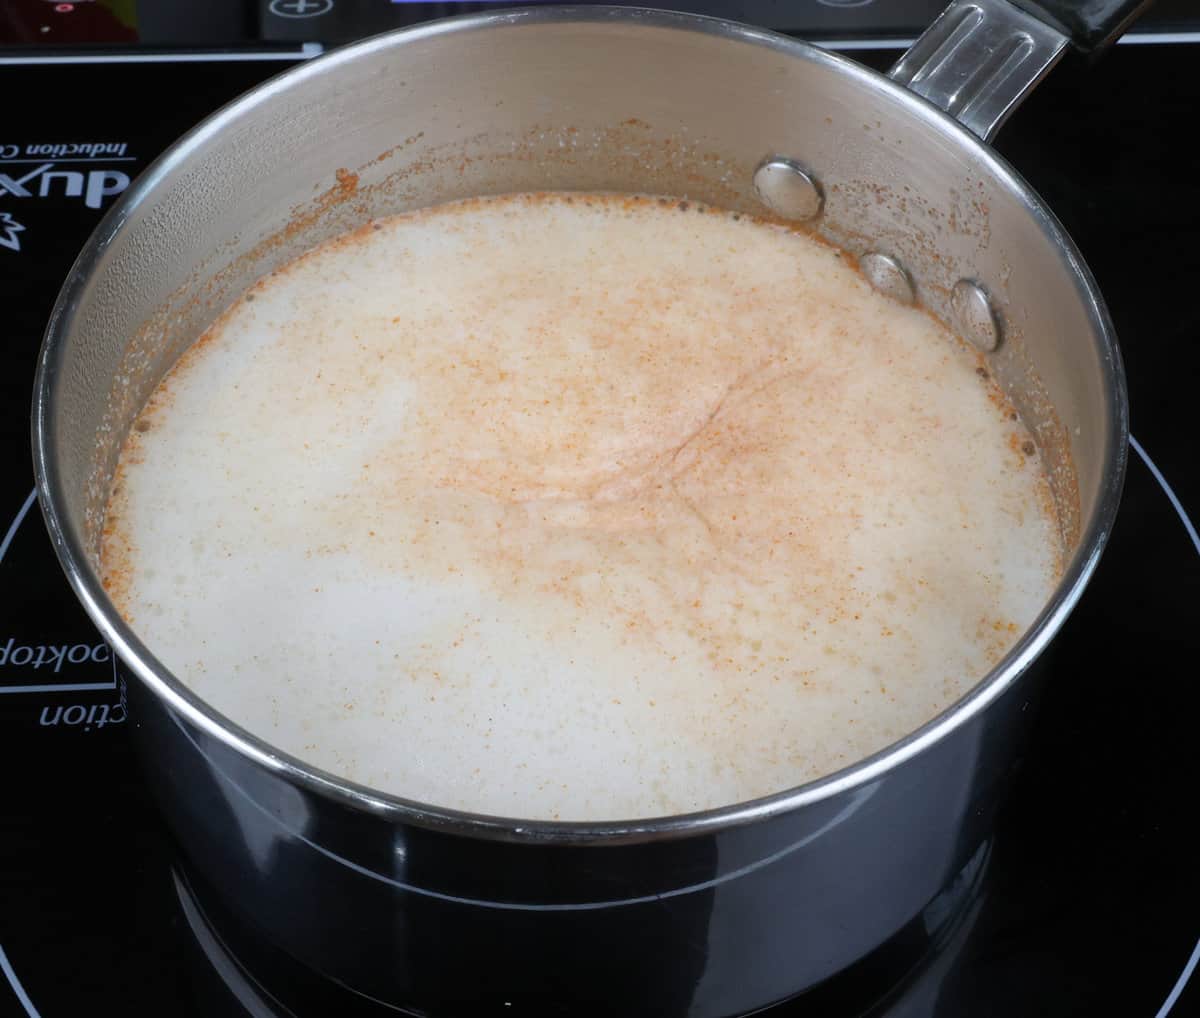 milk, paprika, and garlic powder simmering in a small pot